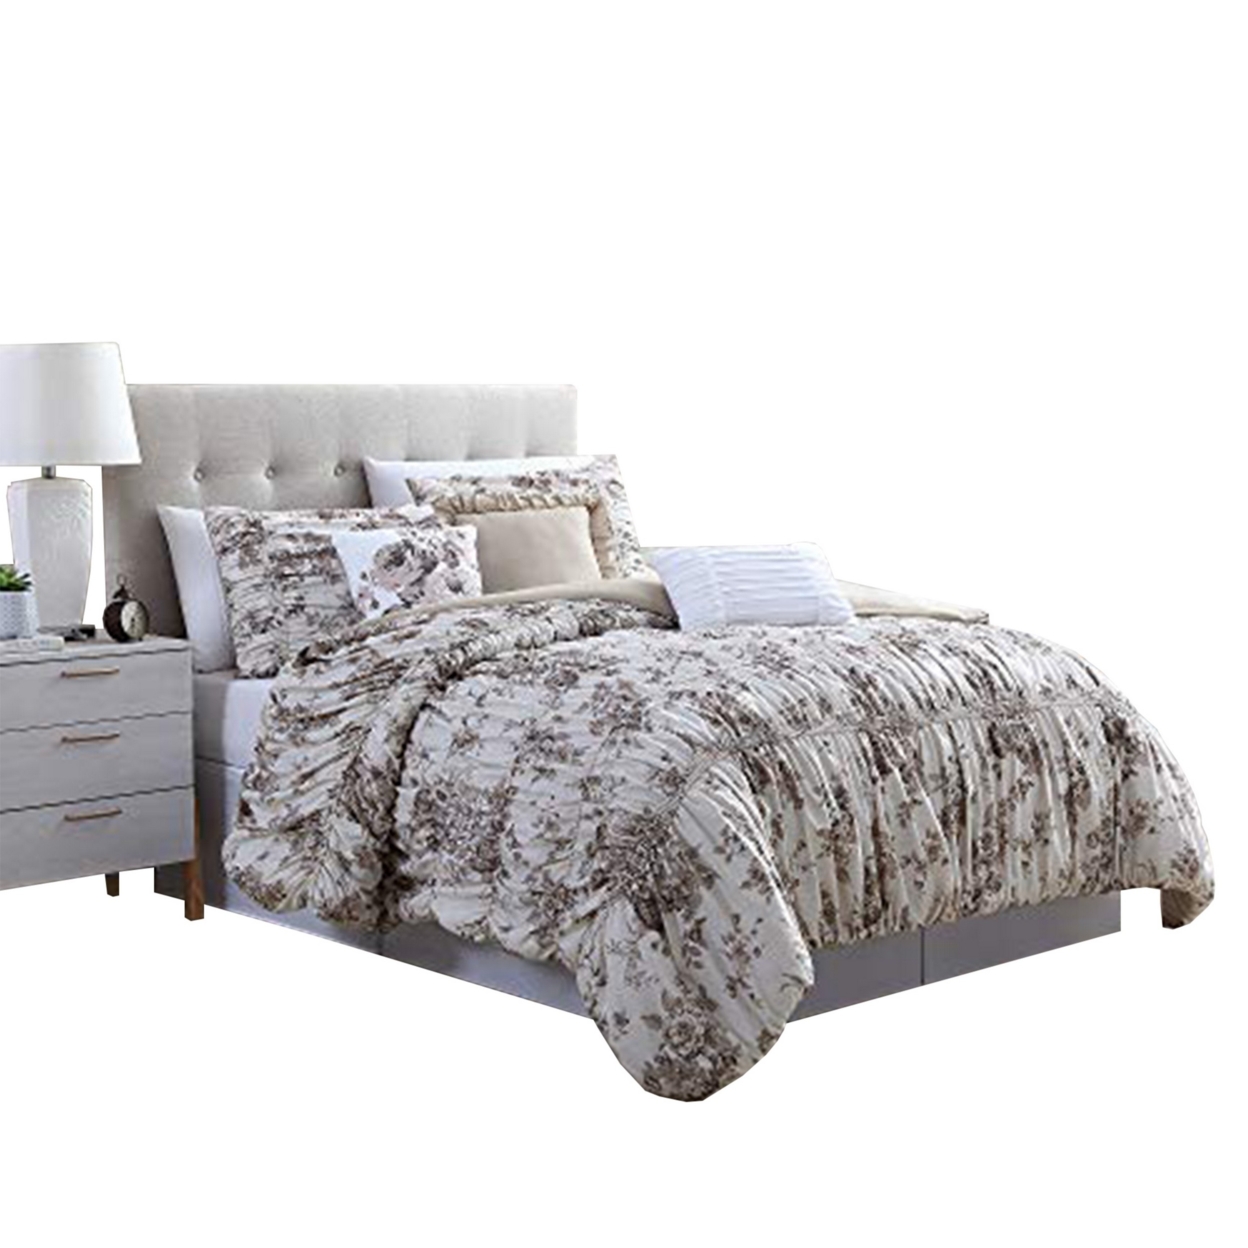 Lyon 6 Piece Floral Queen Comforter Set With Shirring The Urban Port, Beige And Brown- Saltoro Sherpi